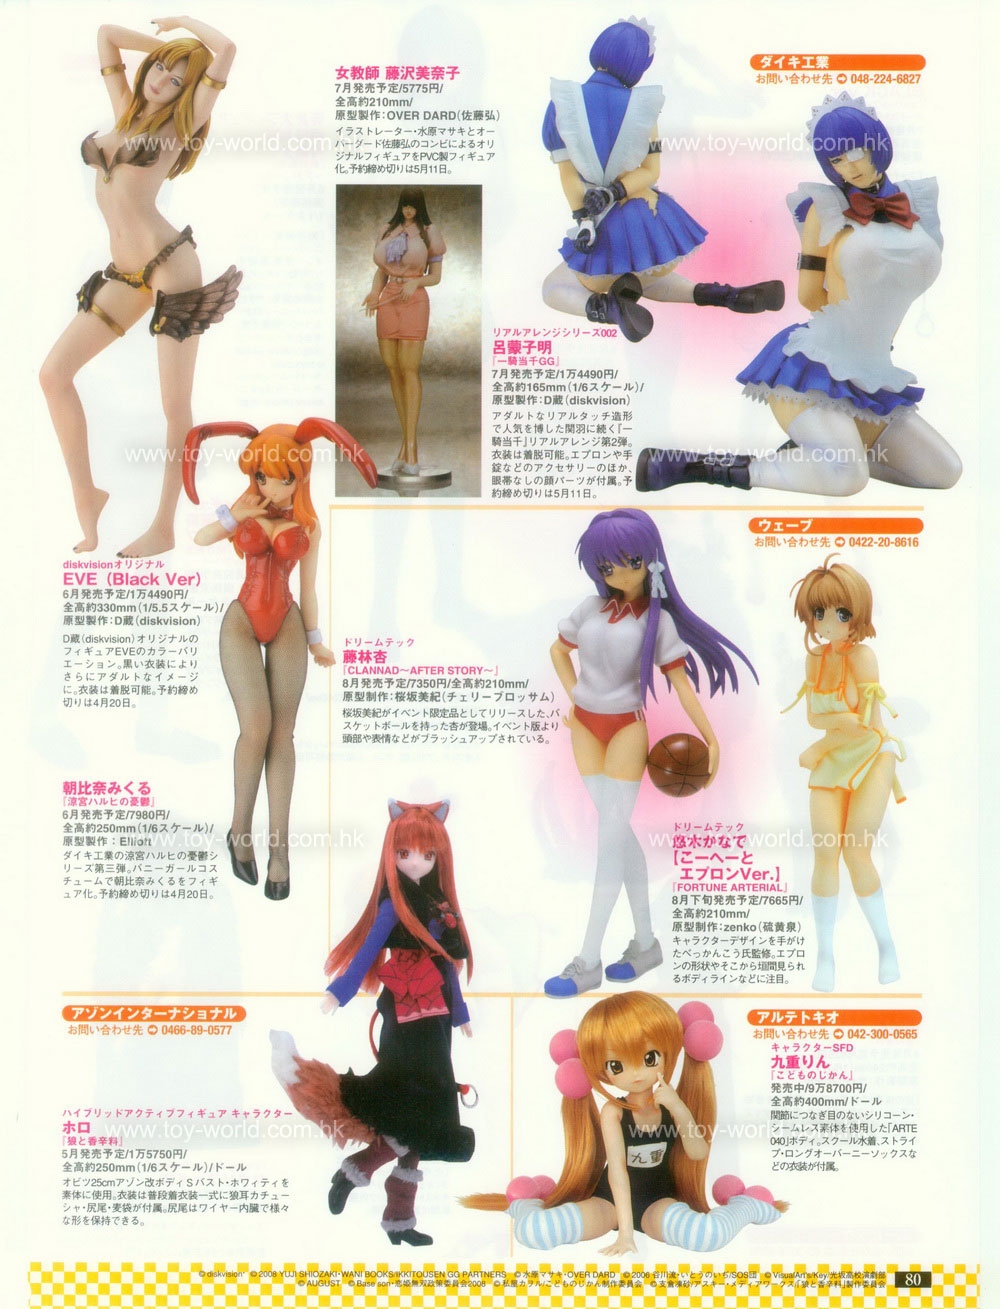 Figure OH No.134 - Special Feature: MACROSS Products 66